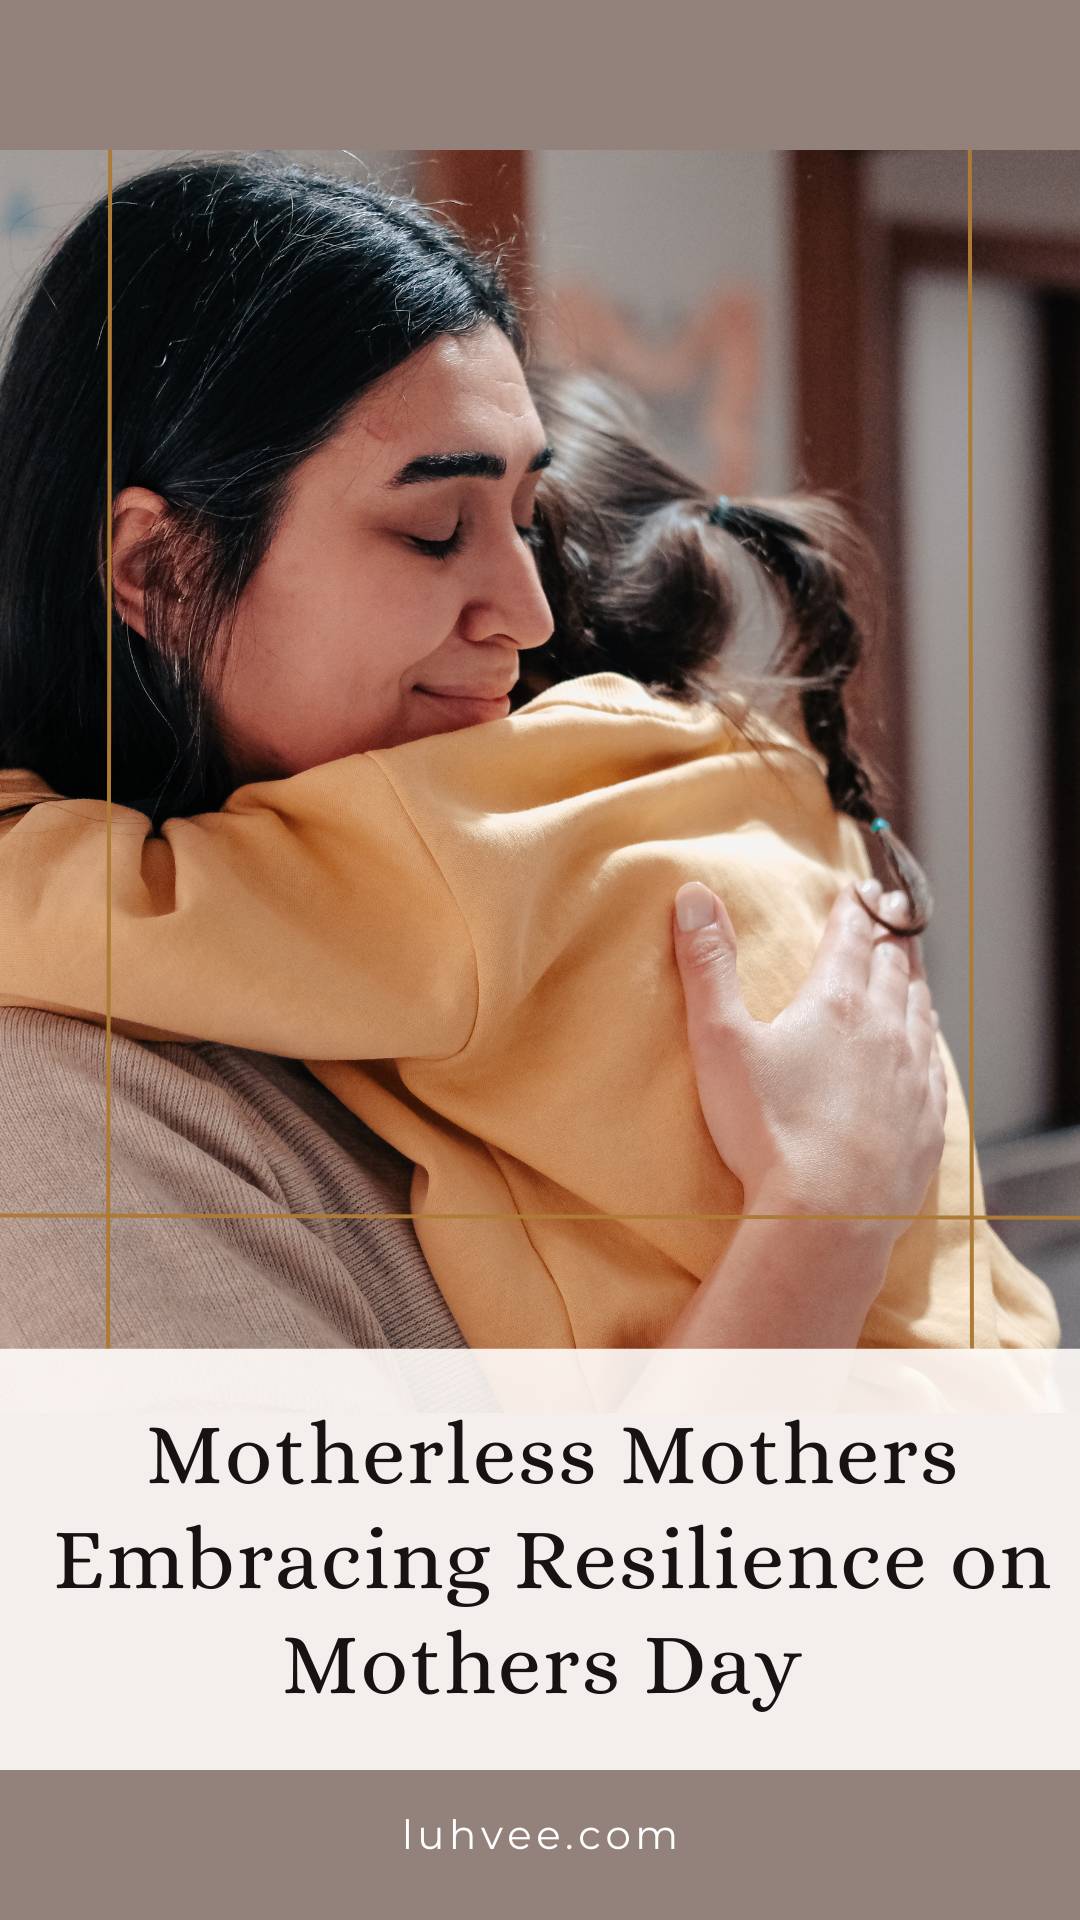 Motherless Mothers Embracing Resilience on Mothers Day